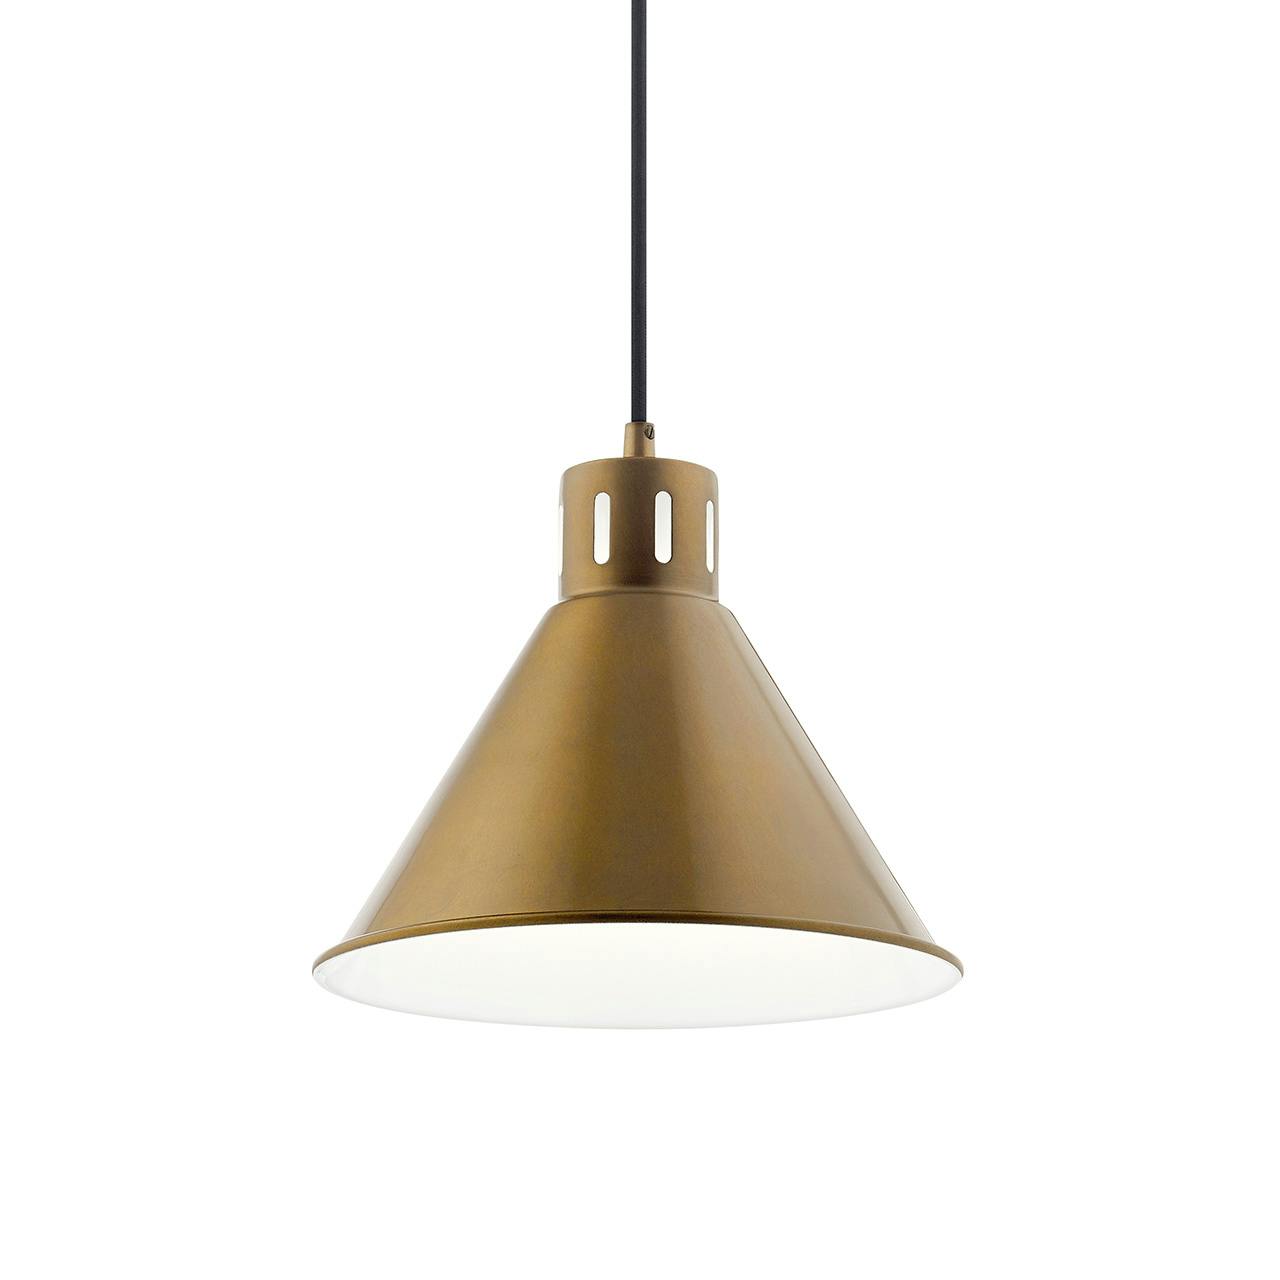 Zailey 9.5" 1 Light Pendant in Brass without the canopy on a white background